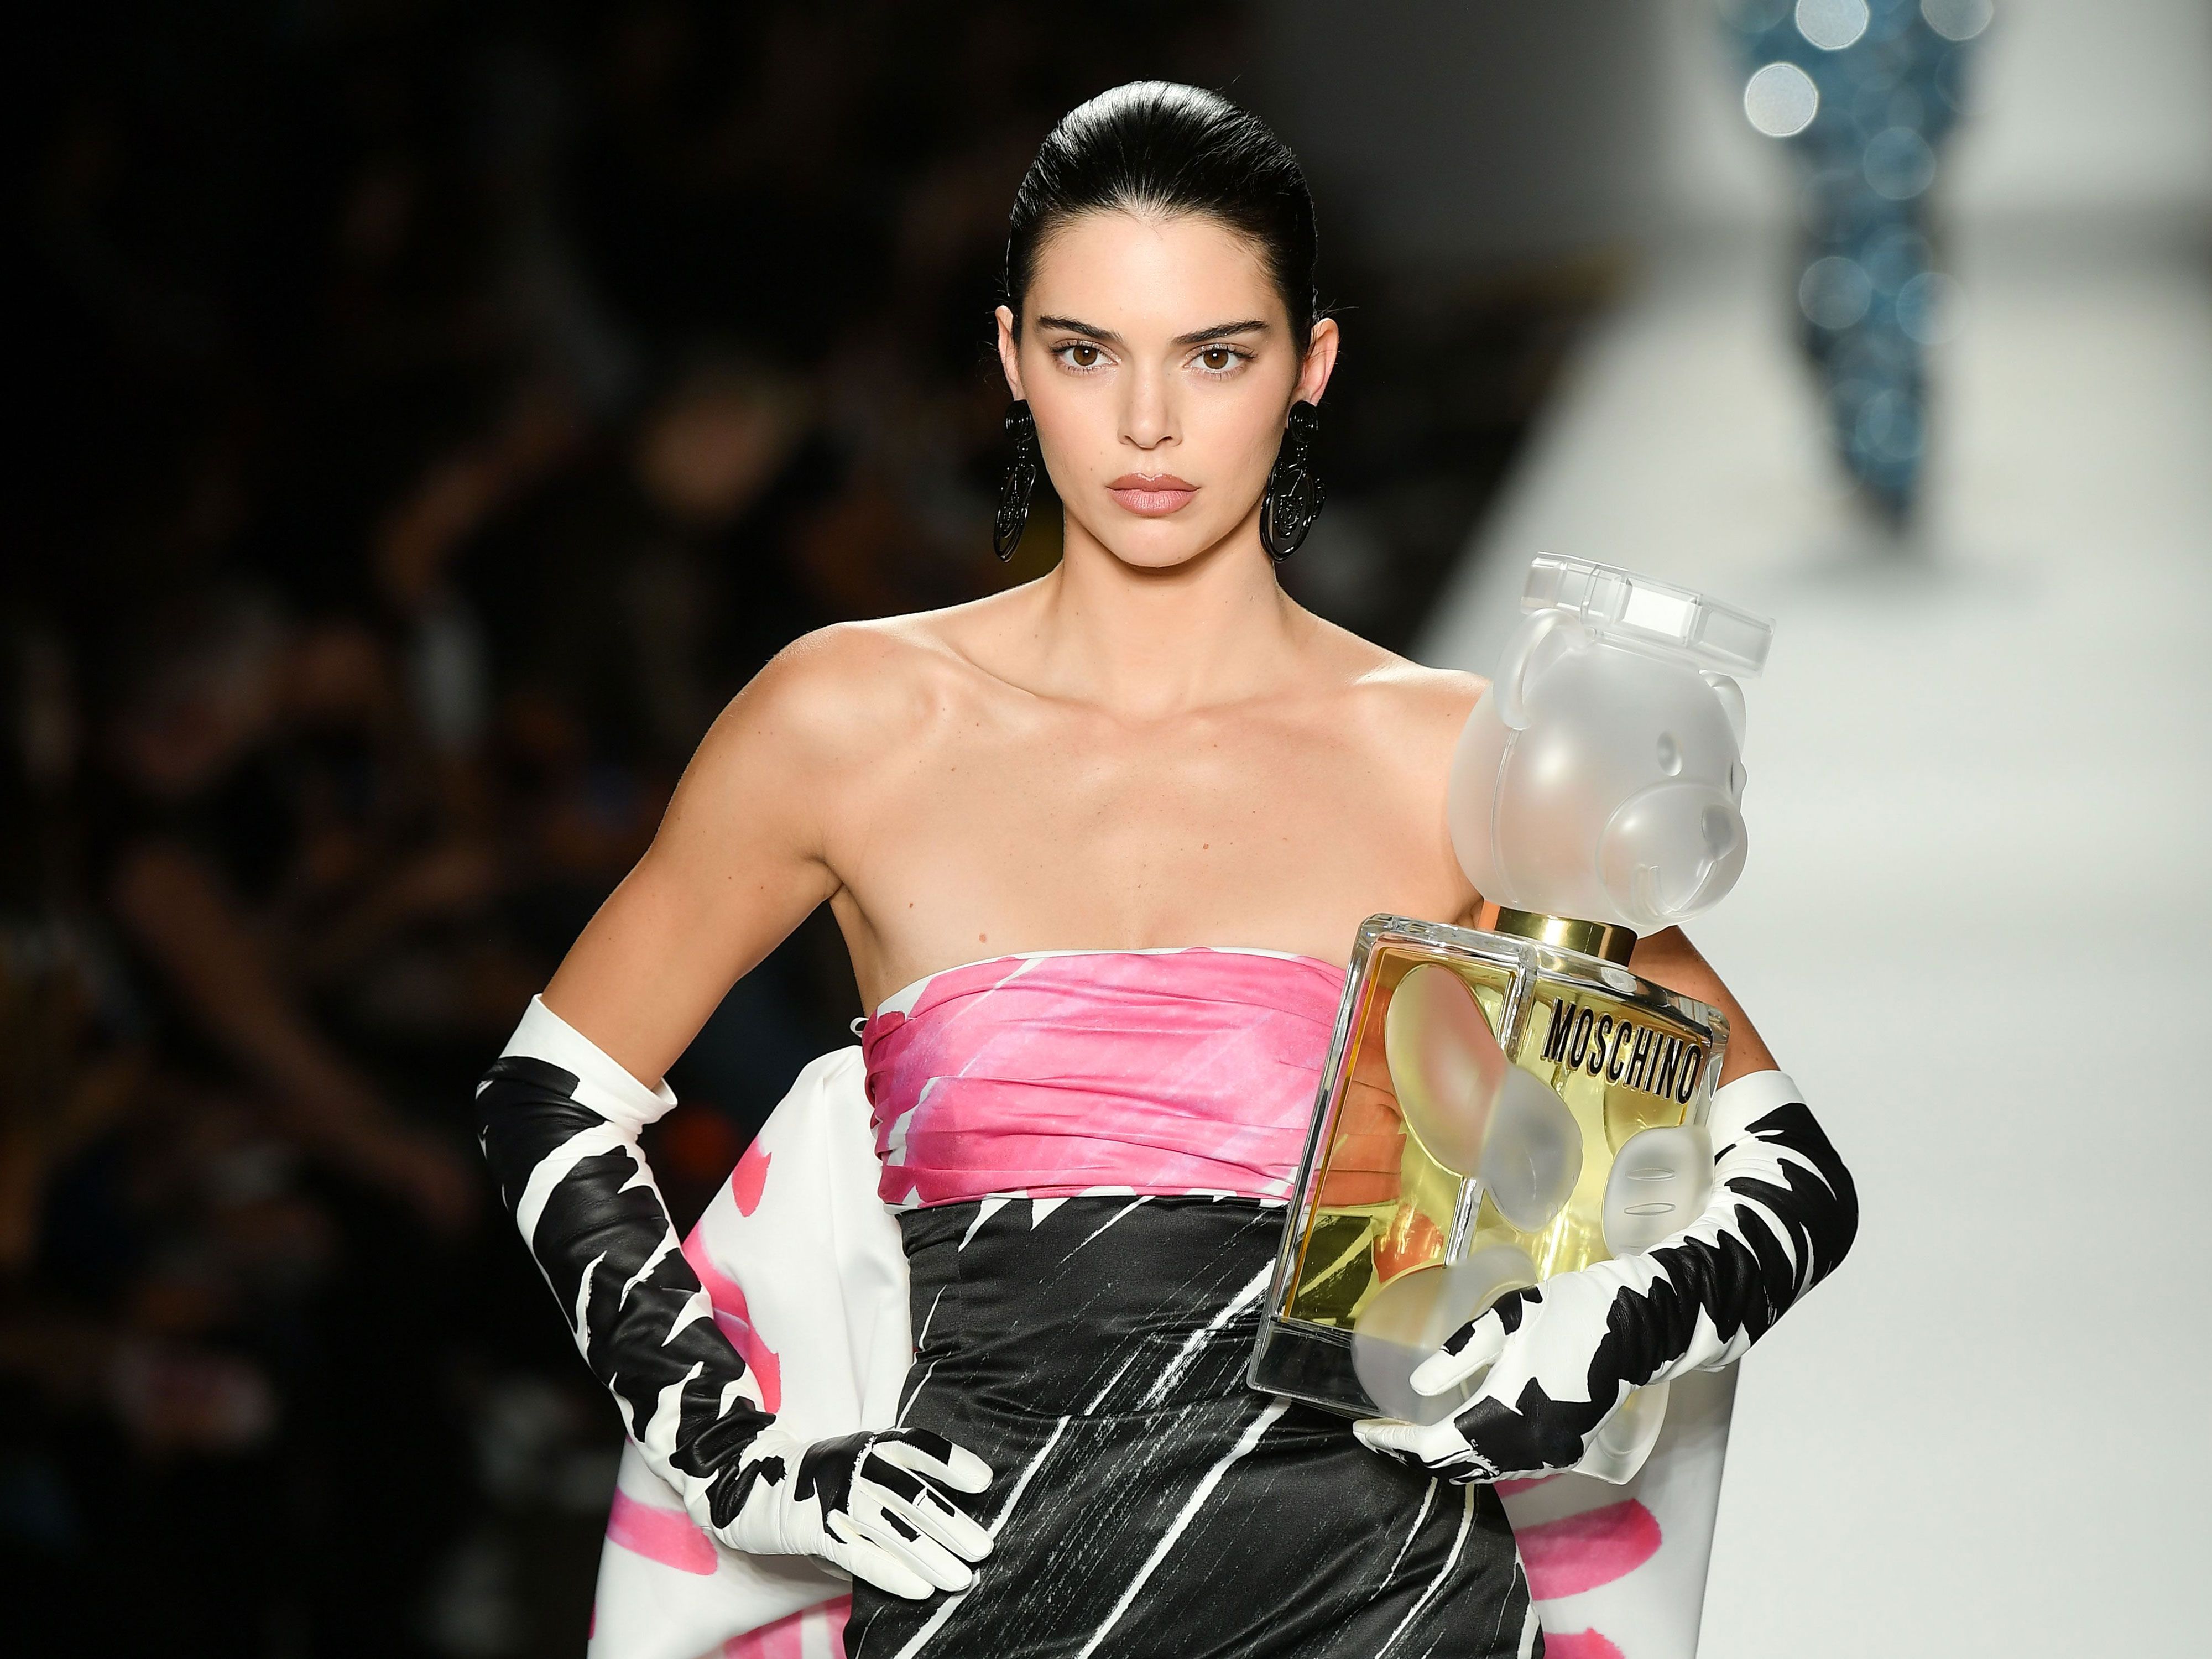 Moschino denies copying the work of an 